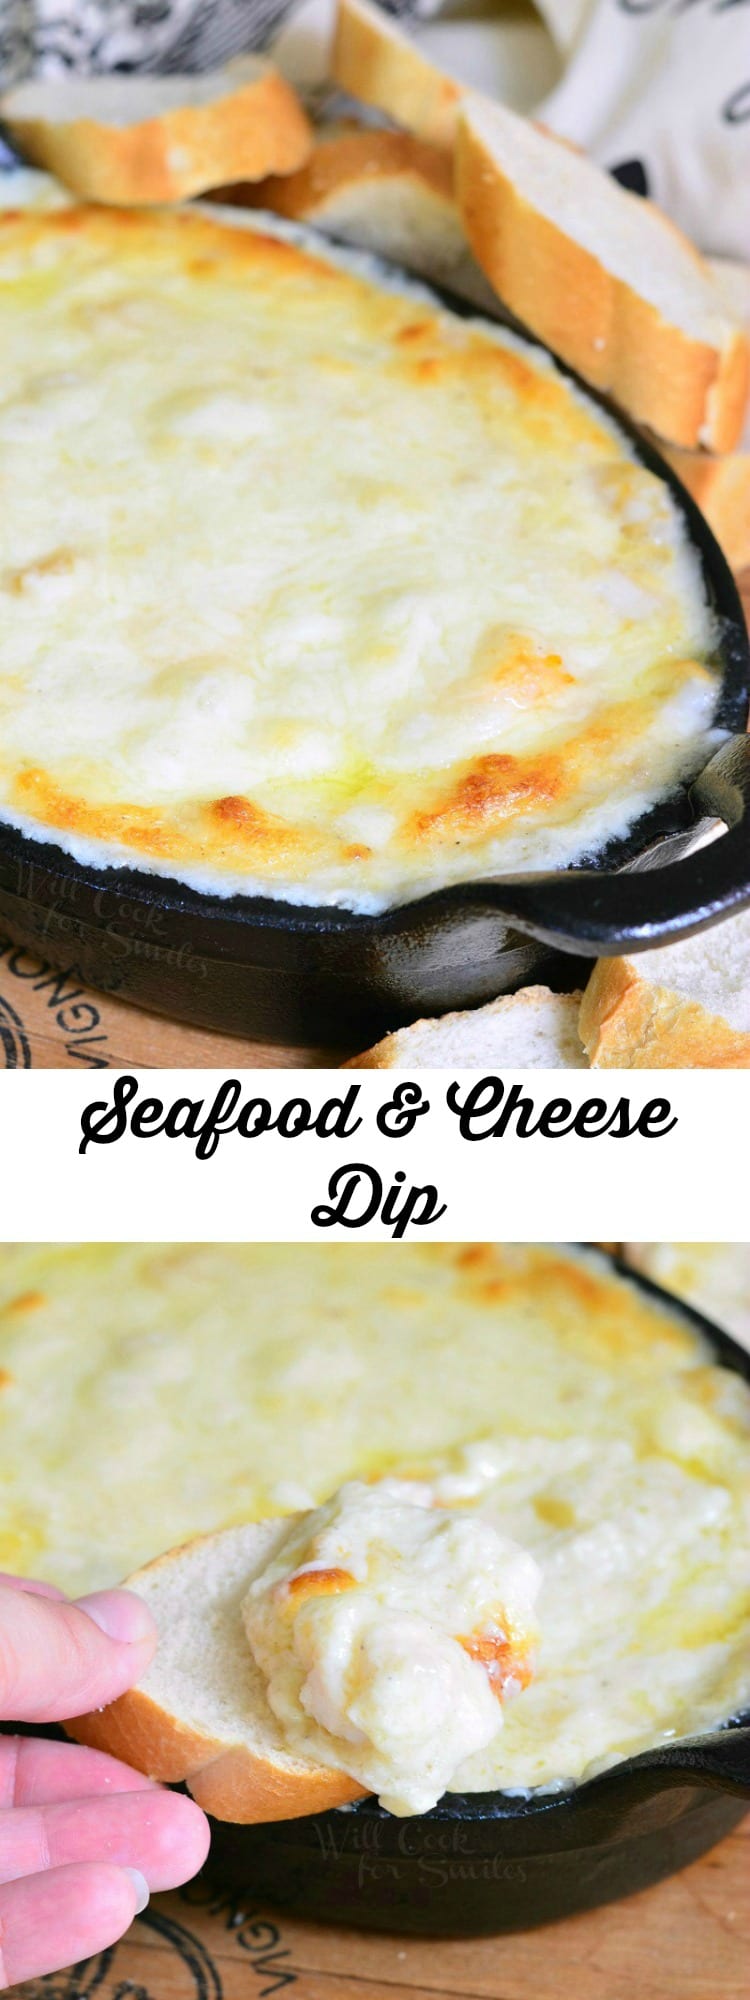 dipping a slice of french bread into Seafood & Cheese Dip that is a cast iron pan 